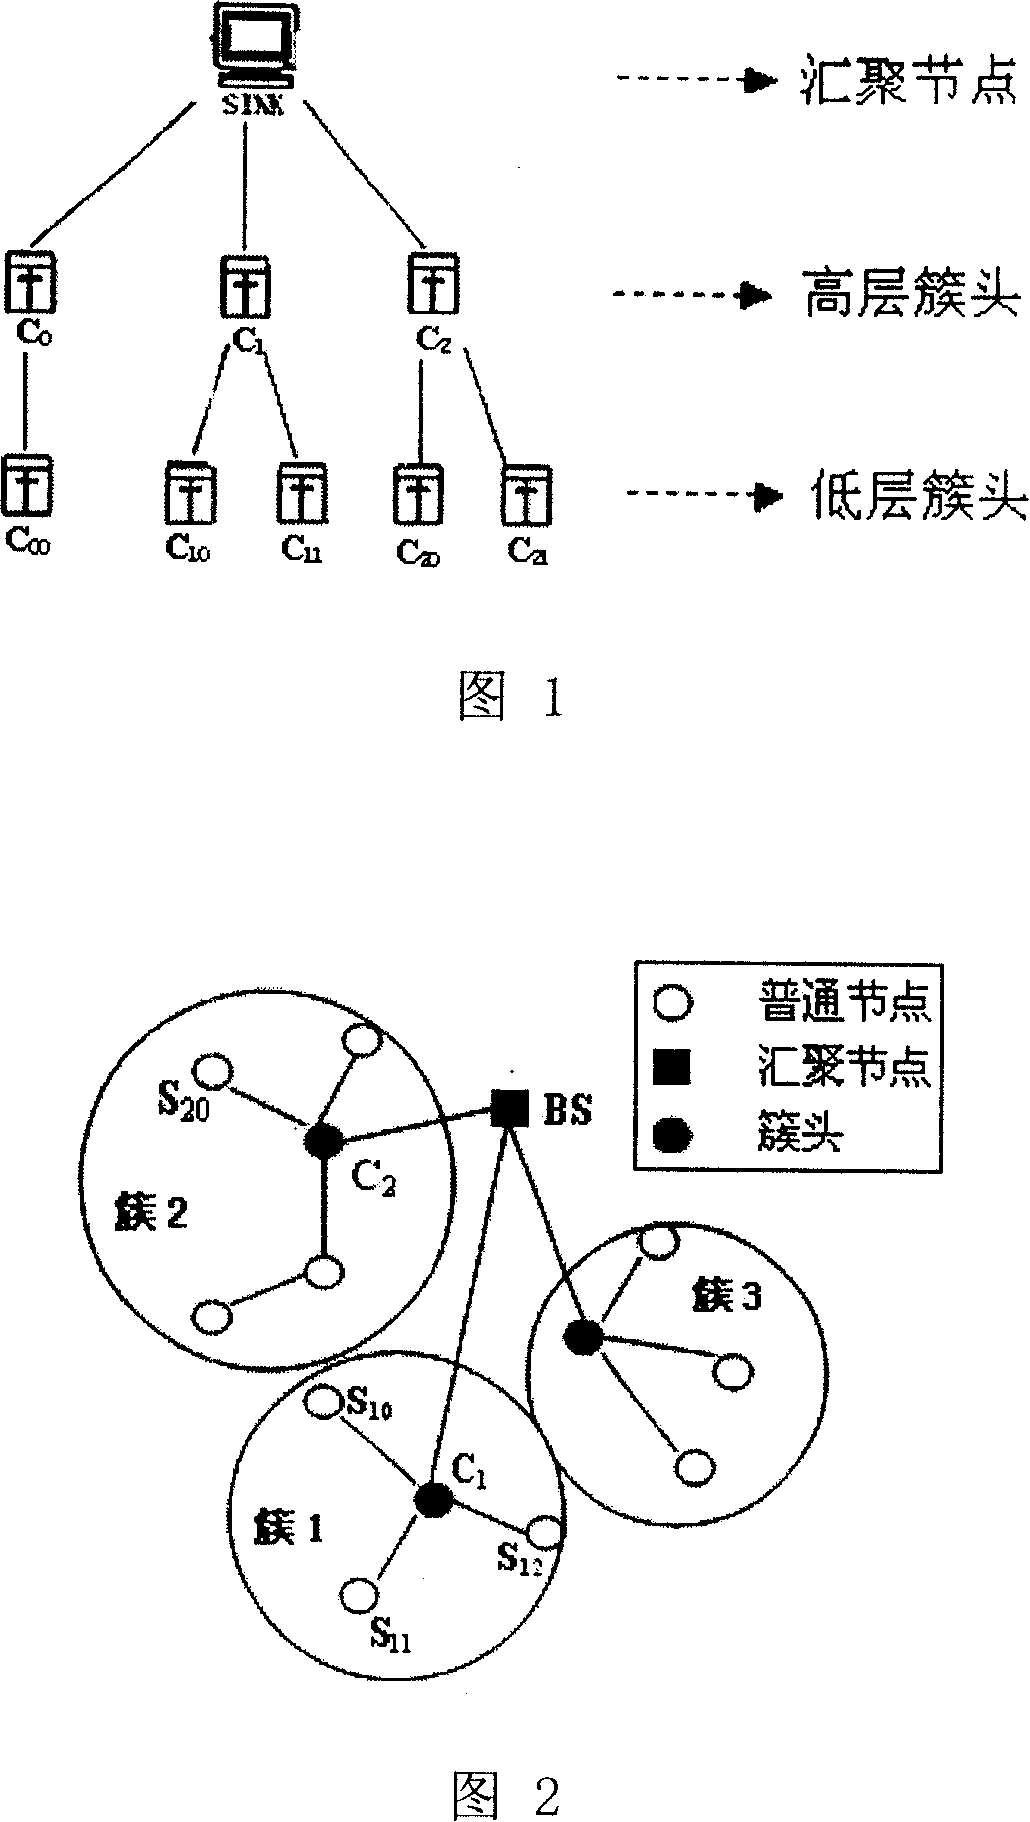 Effective key management method and its operation method for sensor network with clustering structure